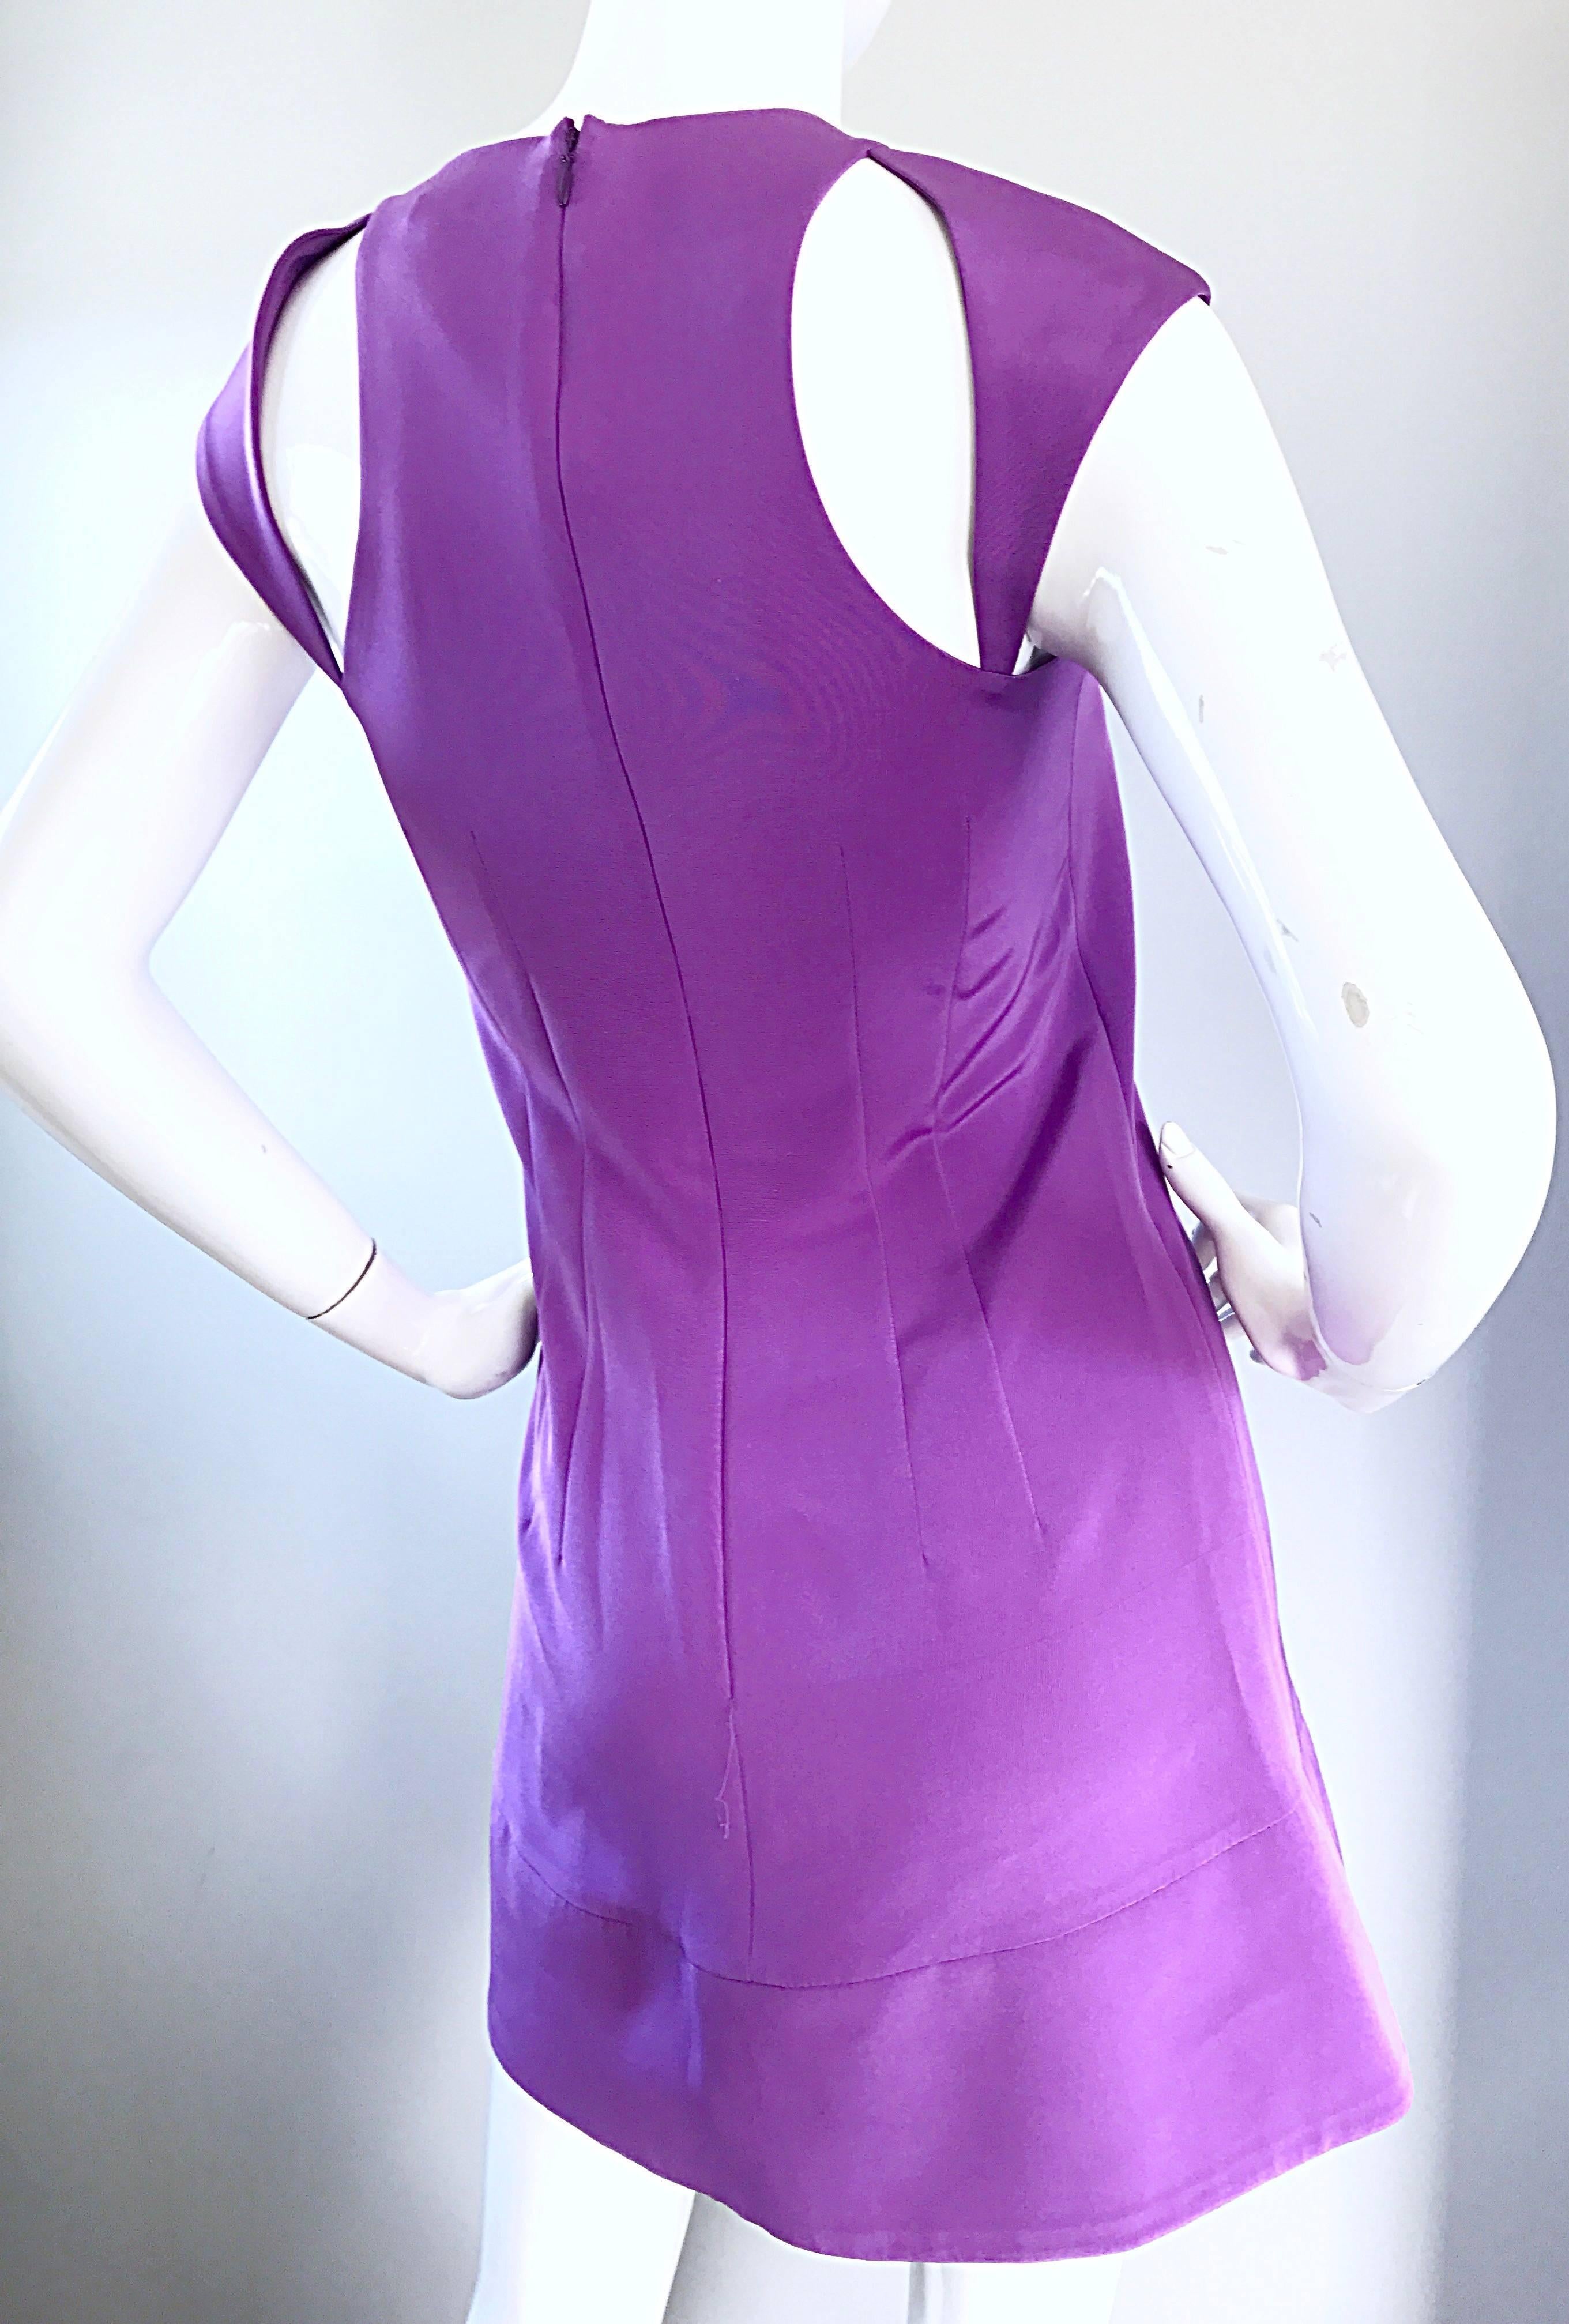 New Jay Godfrey Lavender Purple Cold Shoulder Cut - Out Silk Bodycon Mini Dress In New Condition For Sale In San Diego, CA